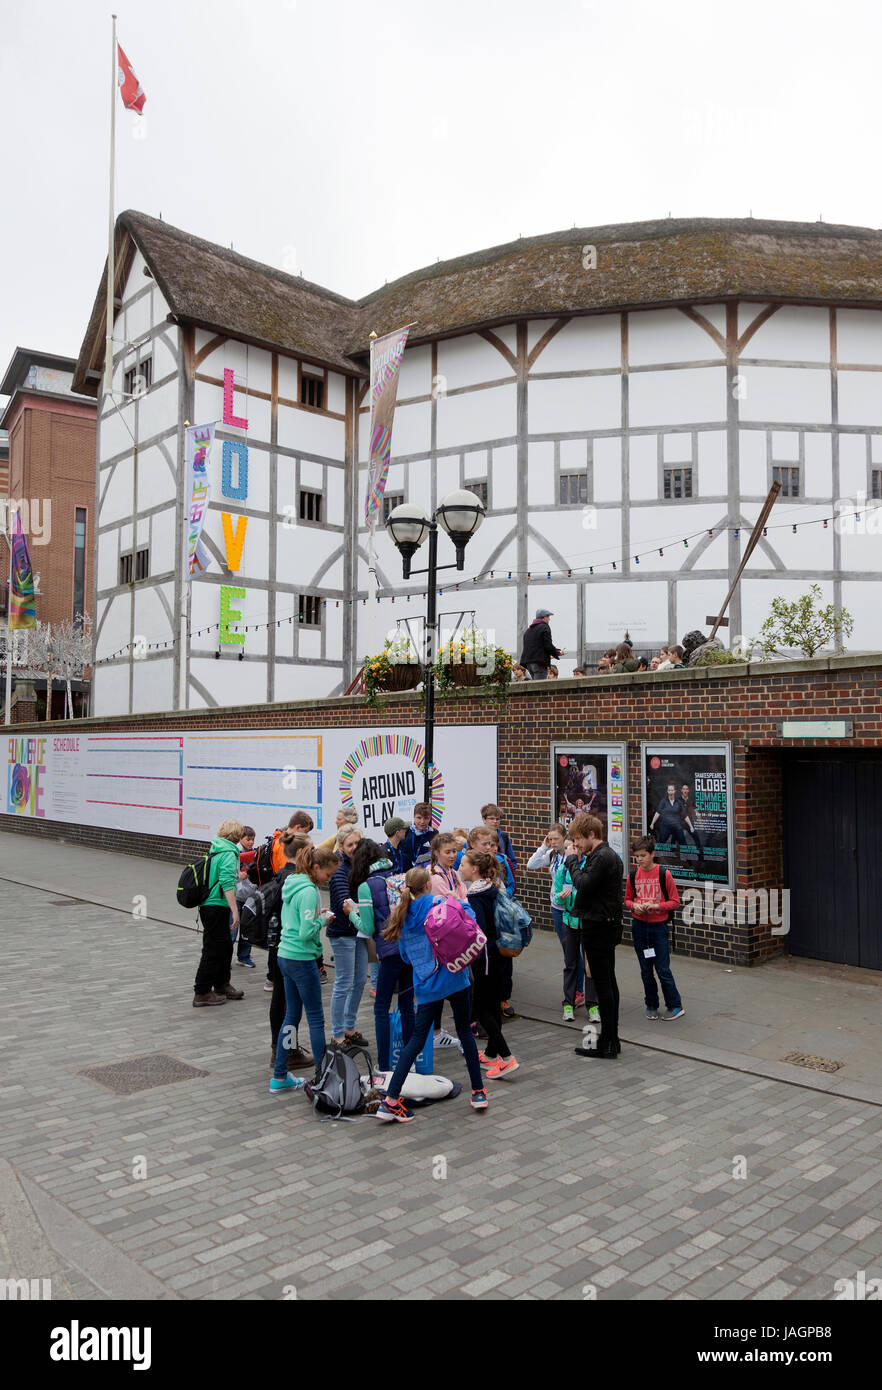 London, United Kingdom, 6 may 2017: group of teenagers stands in front of shakespeare's globe theatre on southbank of river thames in london Stock Photo